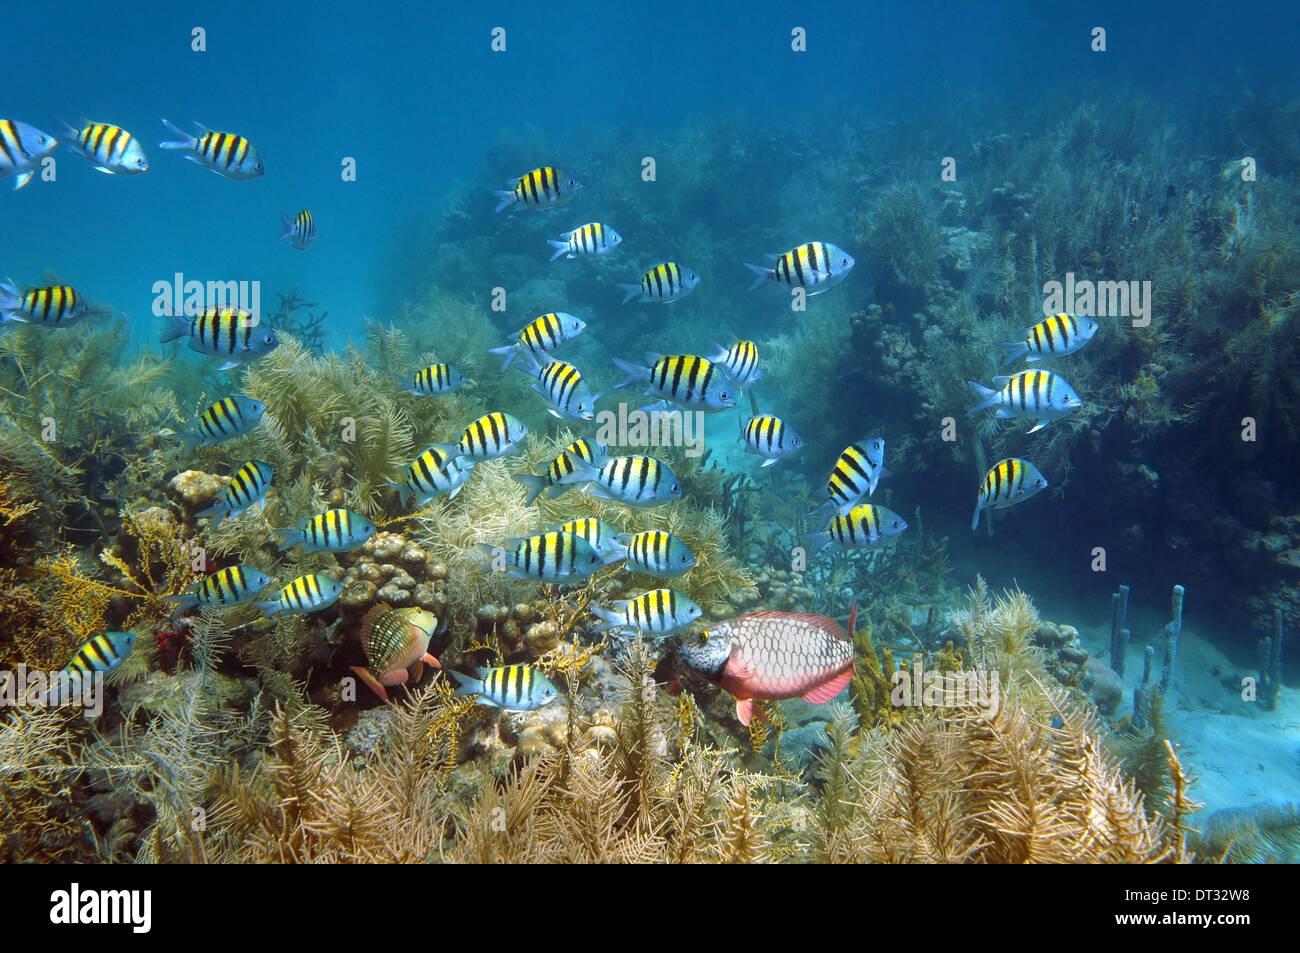 Shoal of fish Sergeant major on a coral reef seabed, Caribbean sea, Martinique Stock Photo